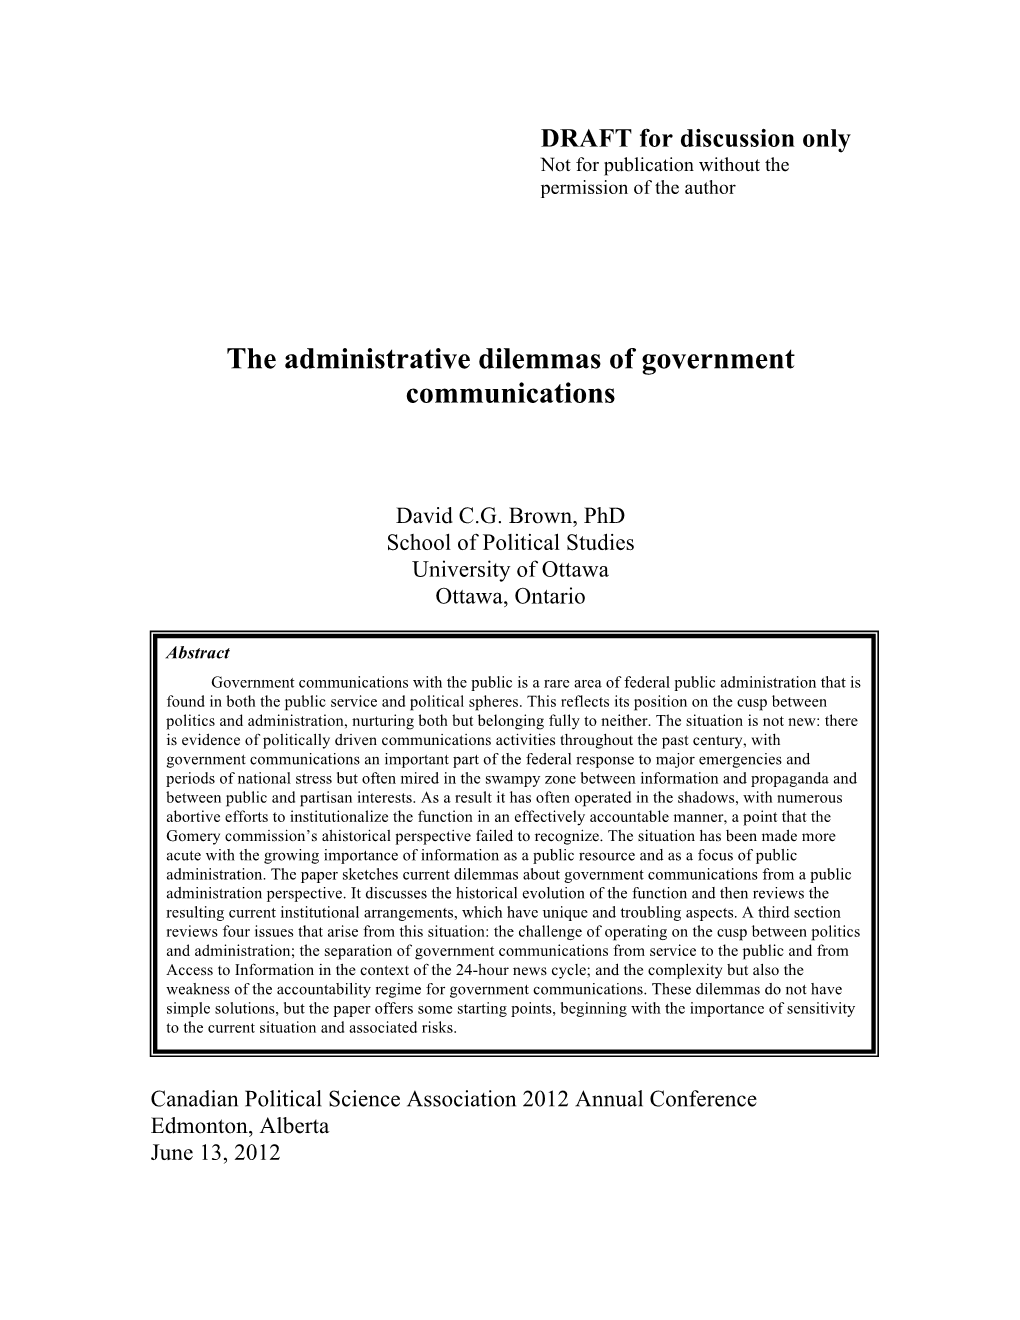 The Administrative Dilemmas of Government Communications